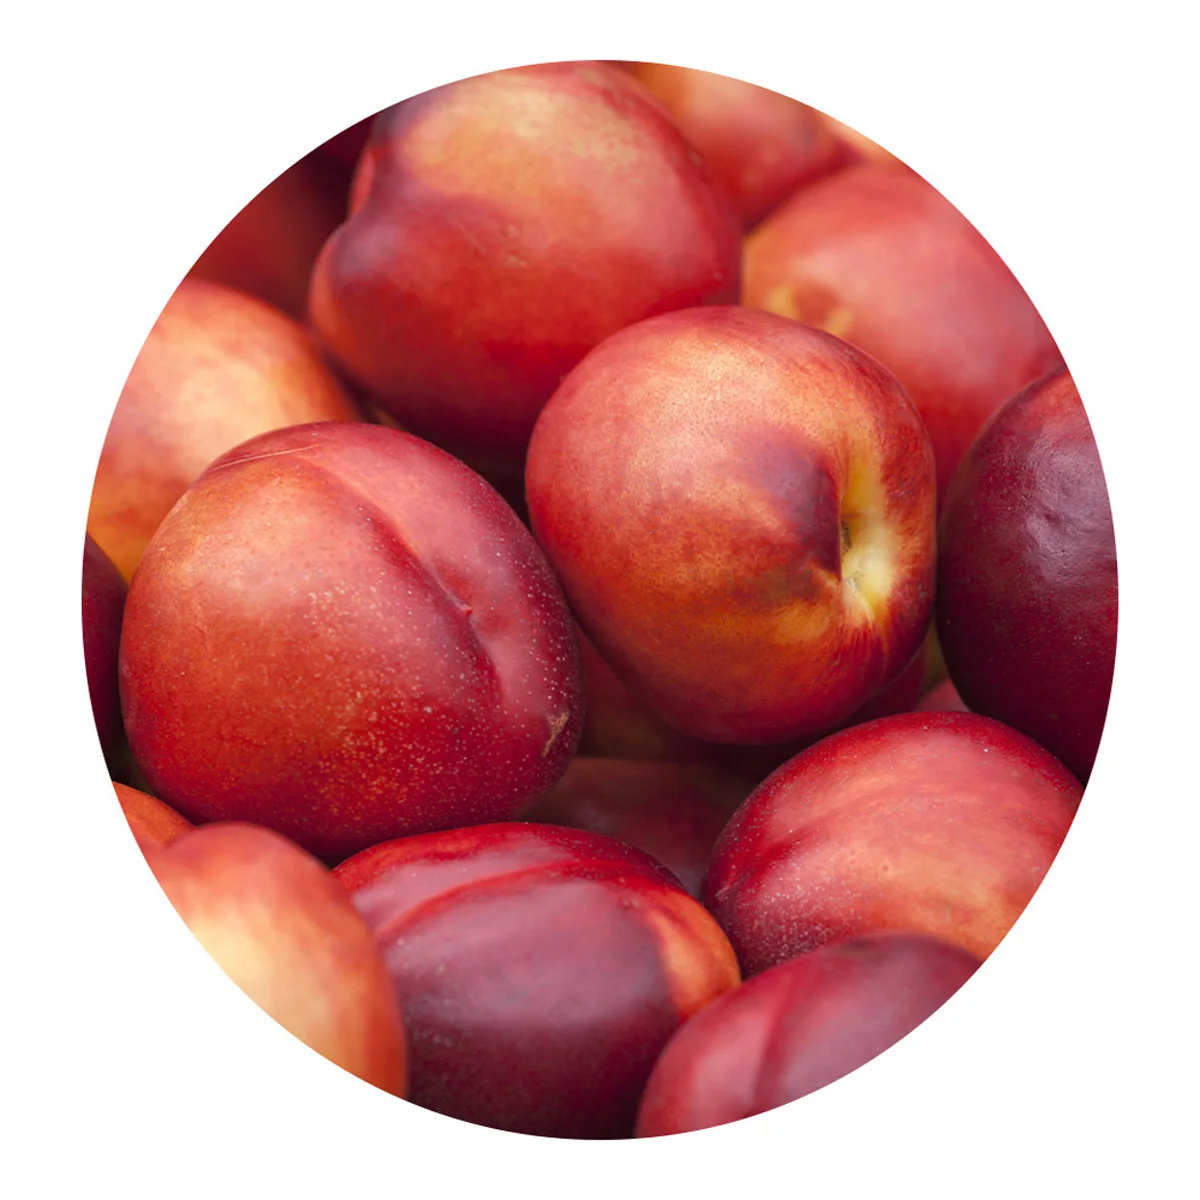 Natural nectarine ripe and delicious from the manufacturer farm natural